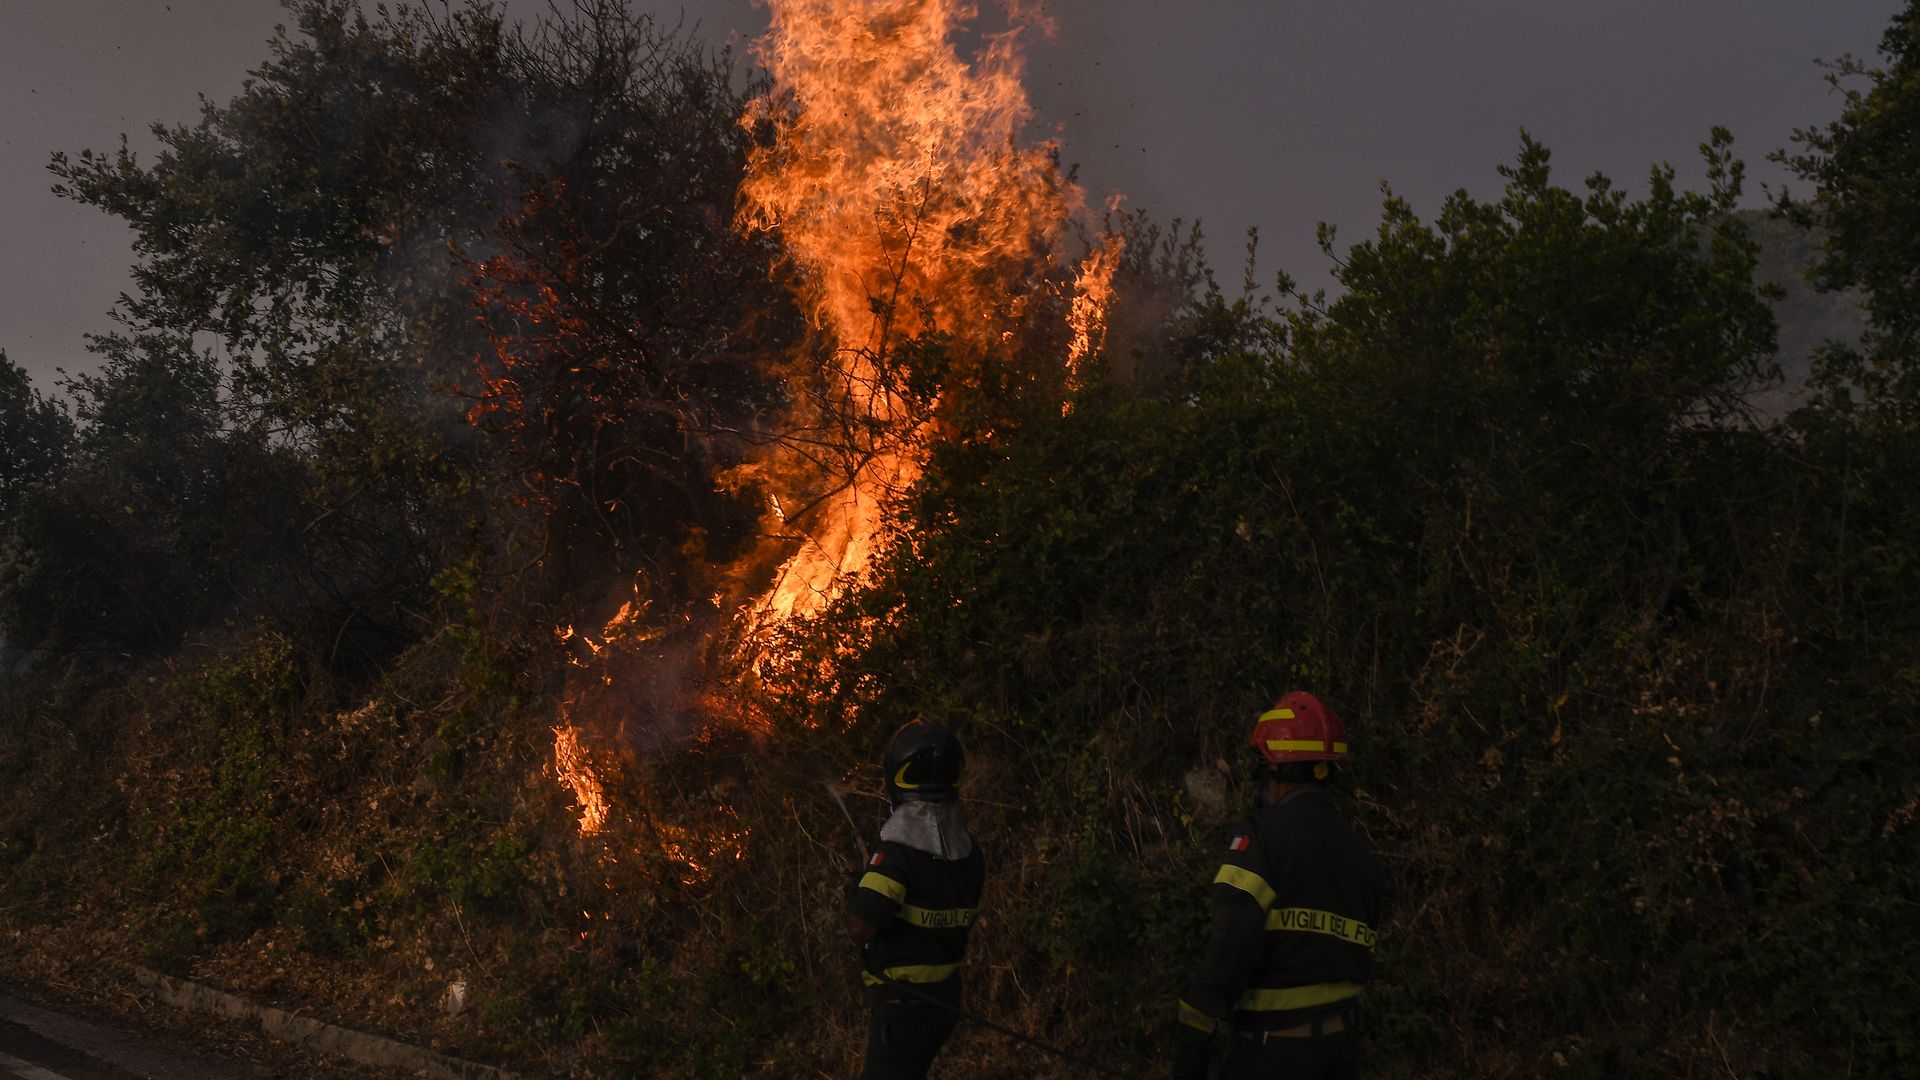 Firefighters battling a blaze in the province of Oristano in Sardinia, Italy, on July 25.